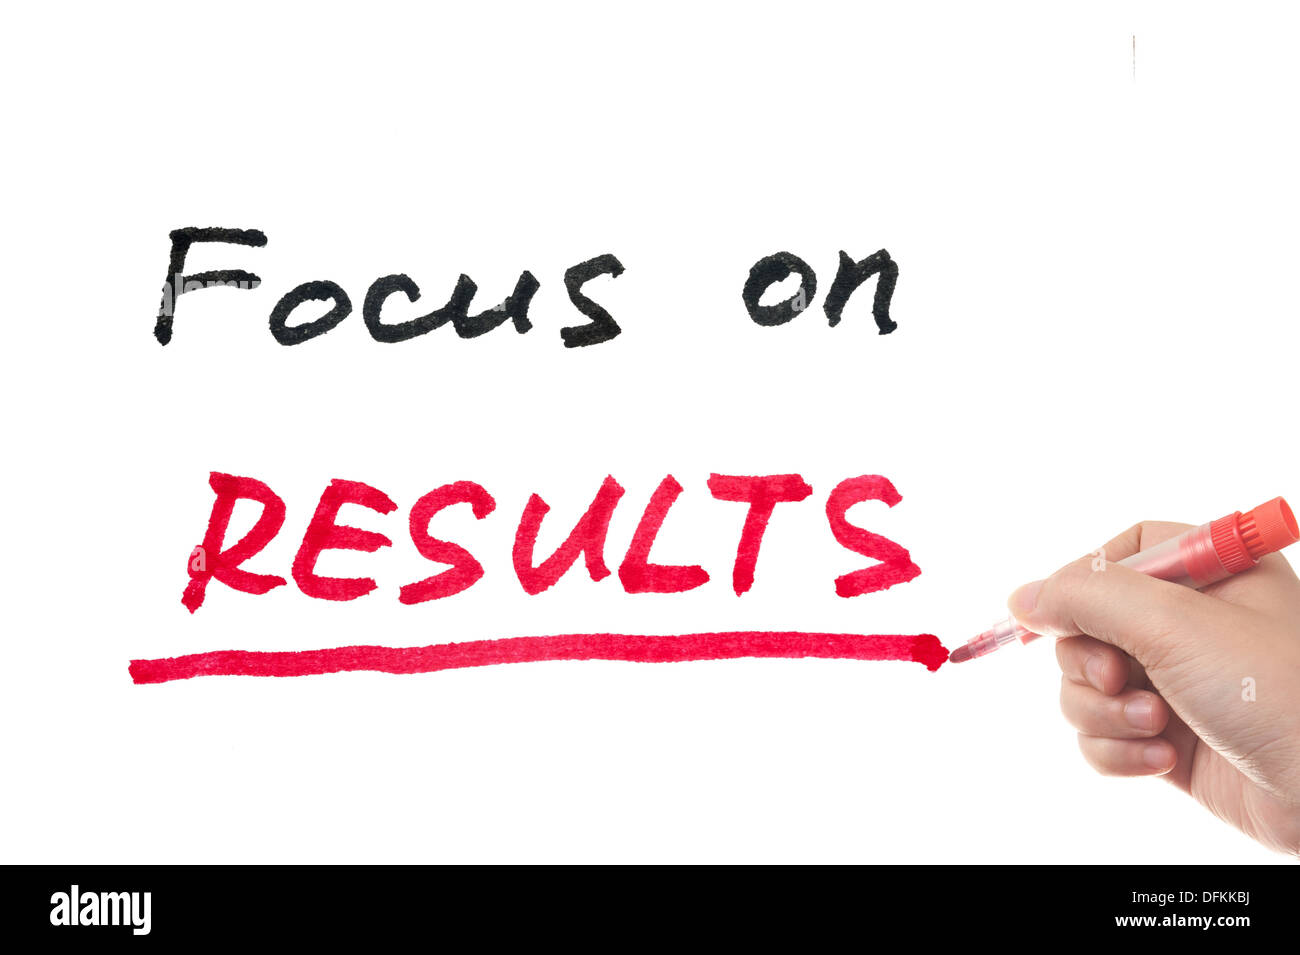 Focus on results words written on white board Stock Photo